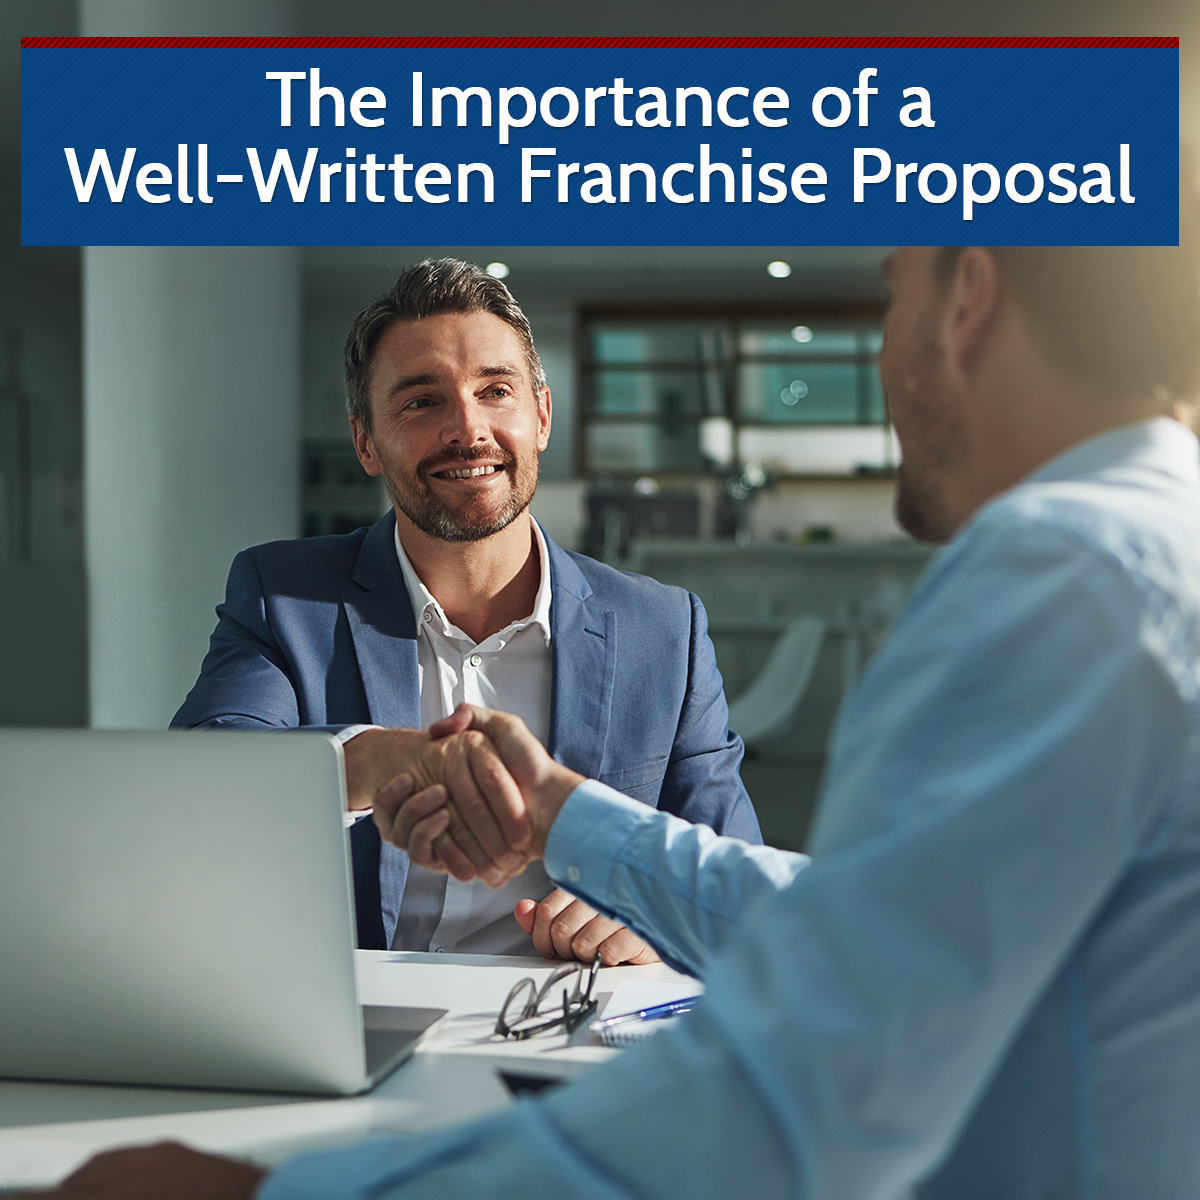 The Importance of a Well-Written Franchise Proposal